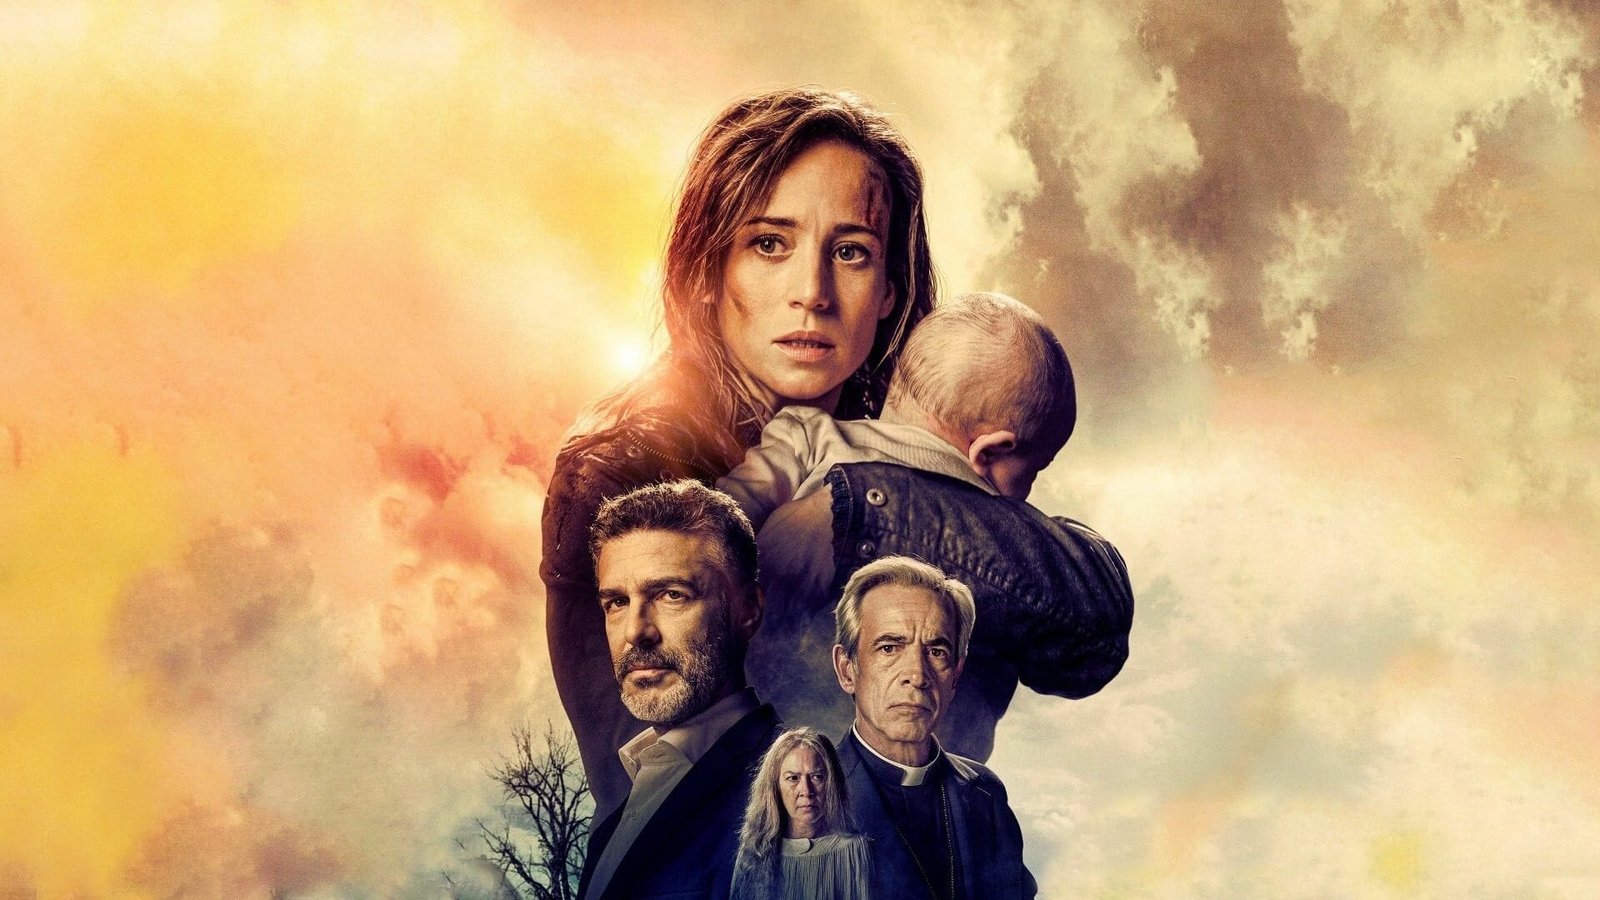 Best mystery movies: The Legacy of the Bones (2019)